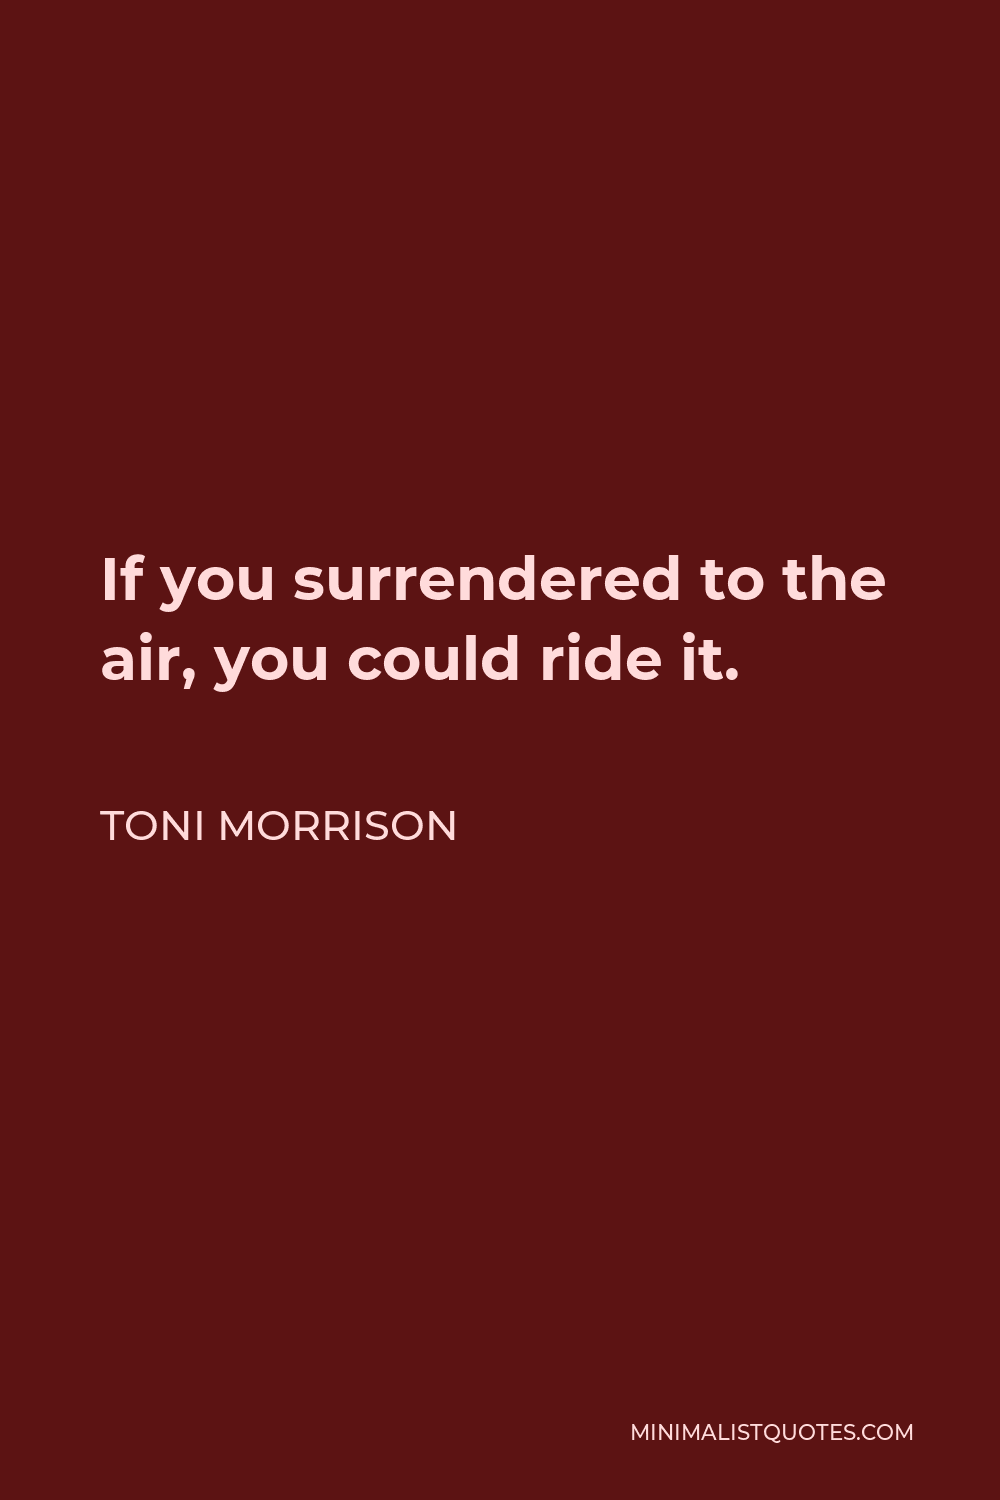 Toni Morrison Quote - If you surrendered to the air, you could ride it.